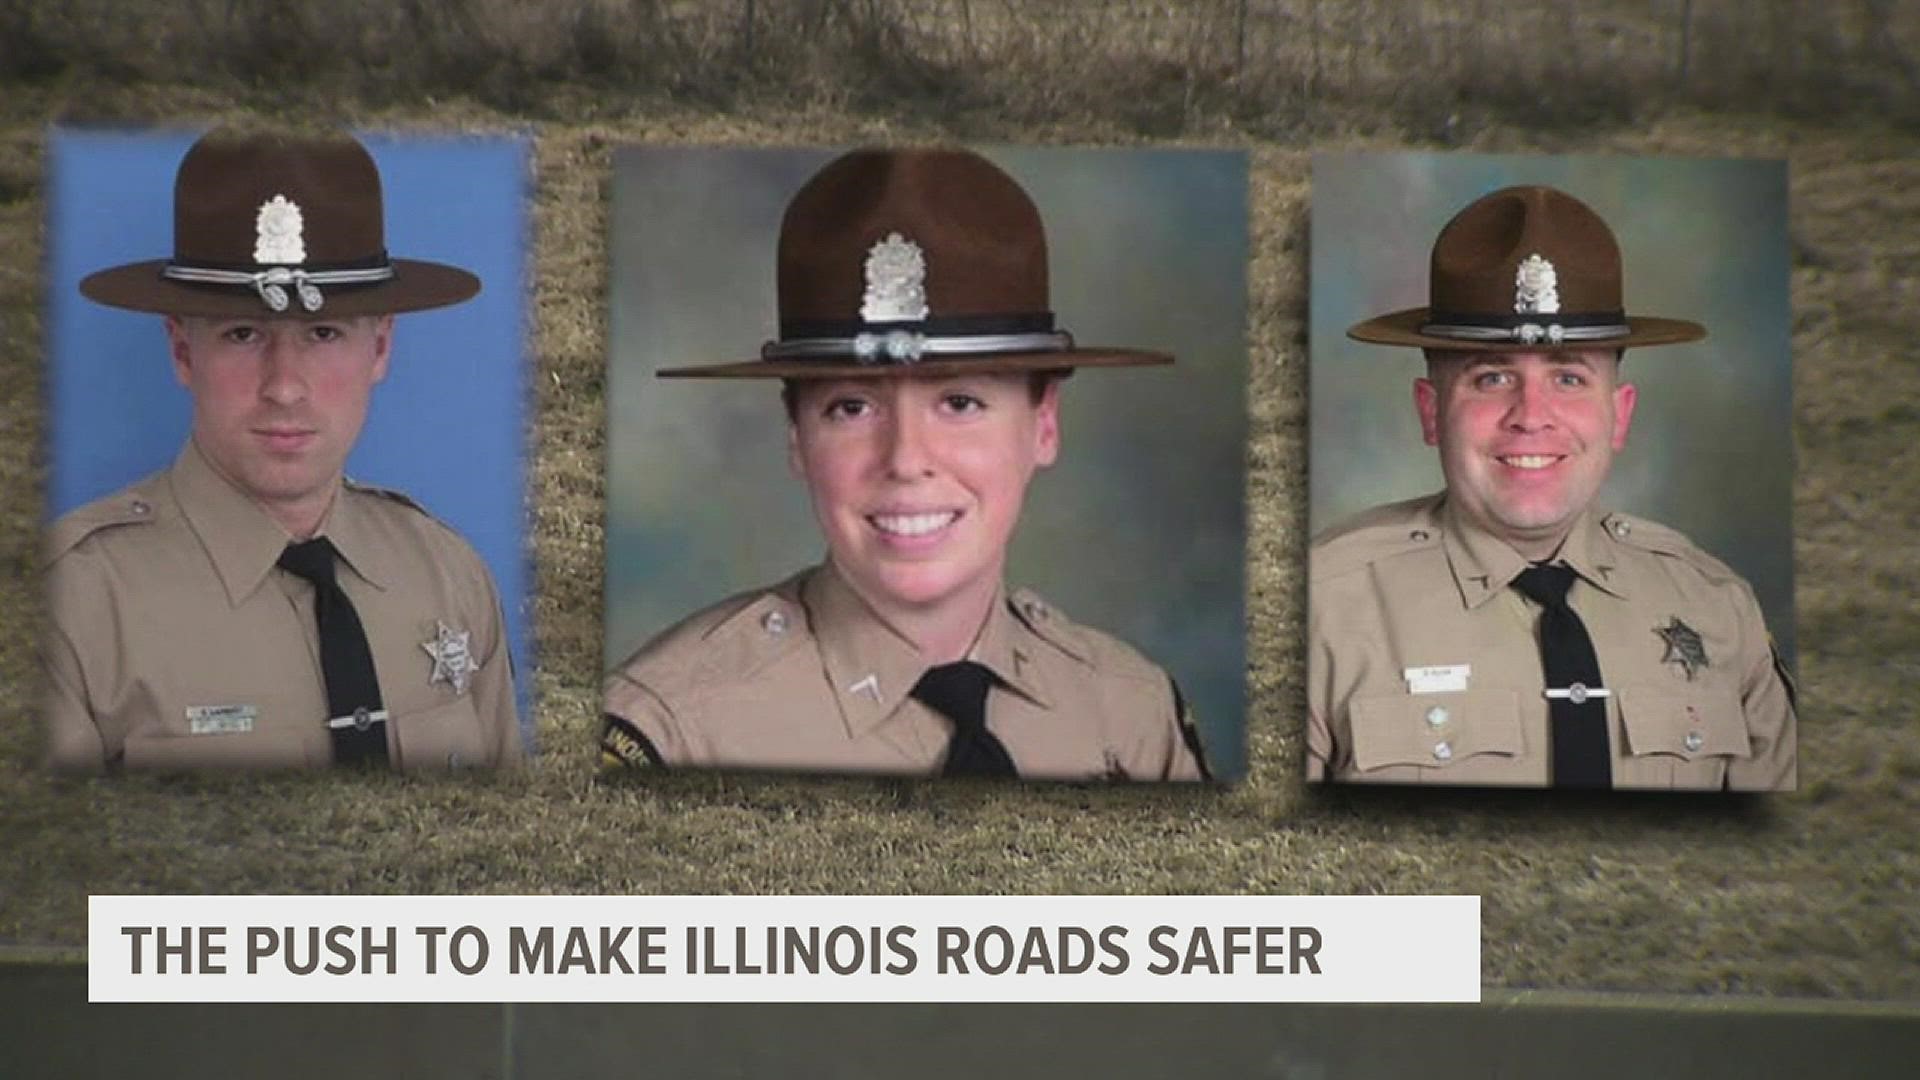 Illinois State Police Trooper Gerald "Jerry" Ellis, 36, was one of three troopers killed in the line of duty in 2019. He graduated from Western Illinois University.